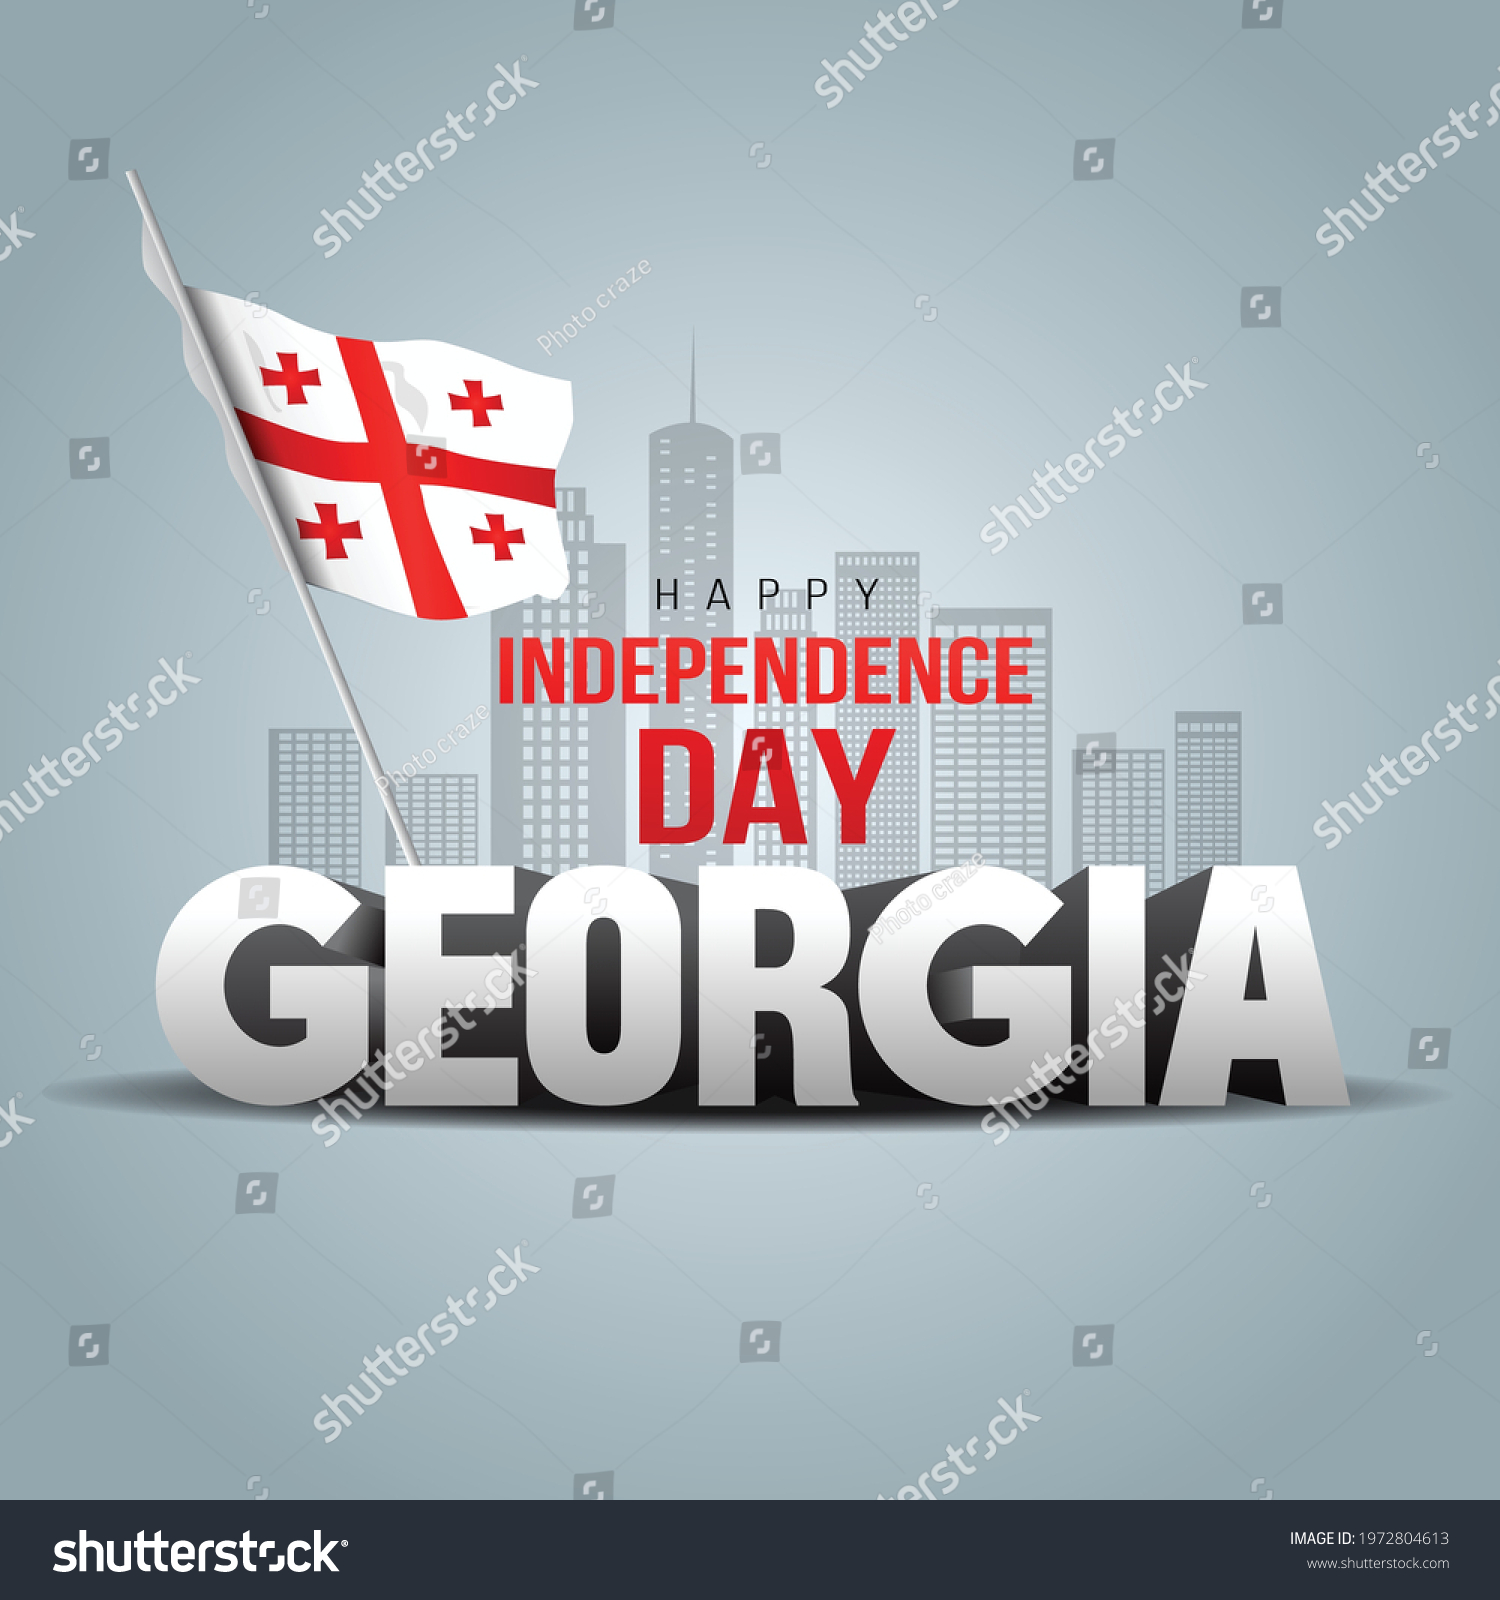 SVG of Happy Independence Day Georgia Vector Template 3d letter with flag svg